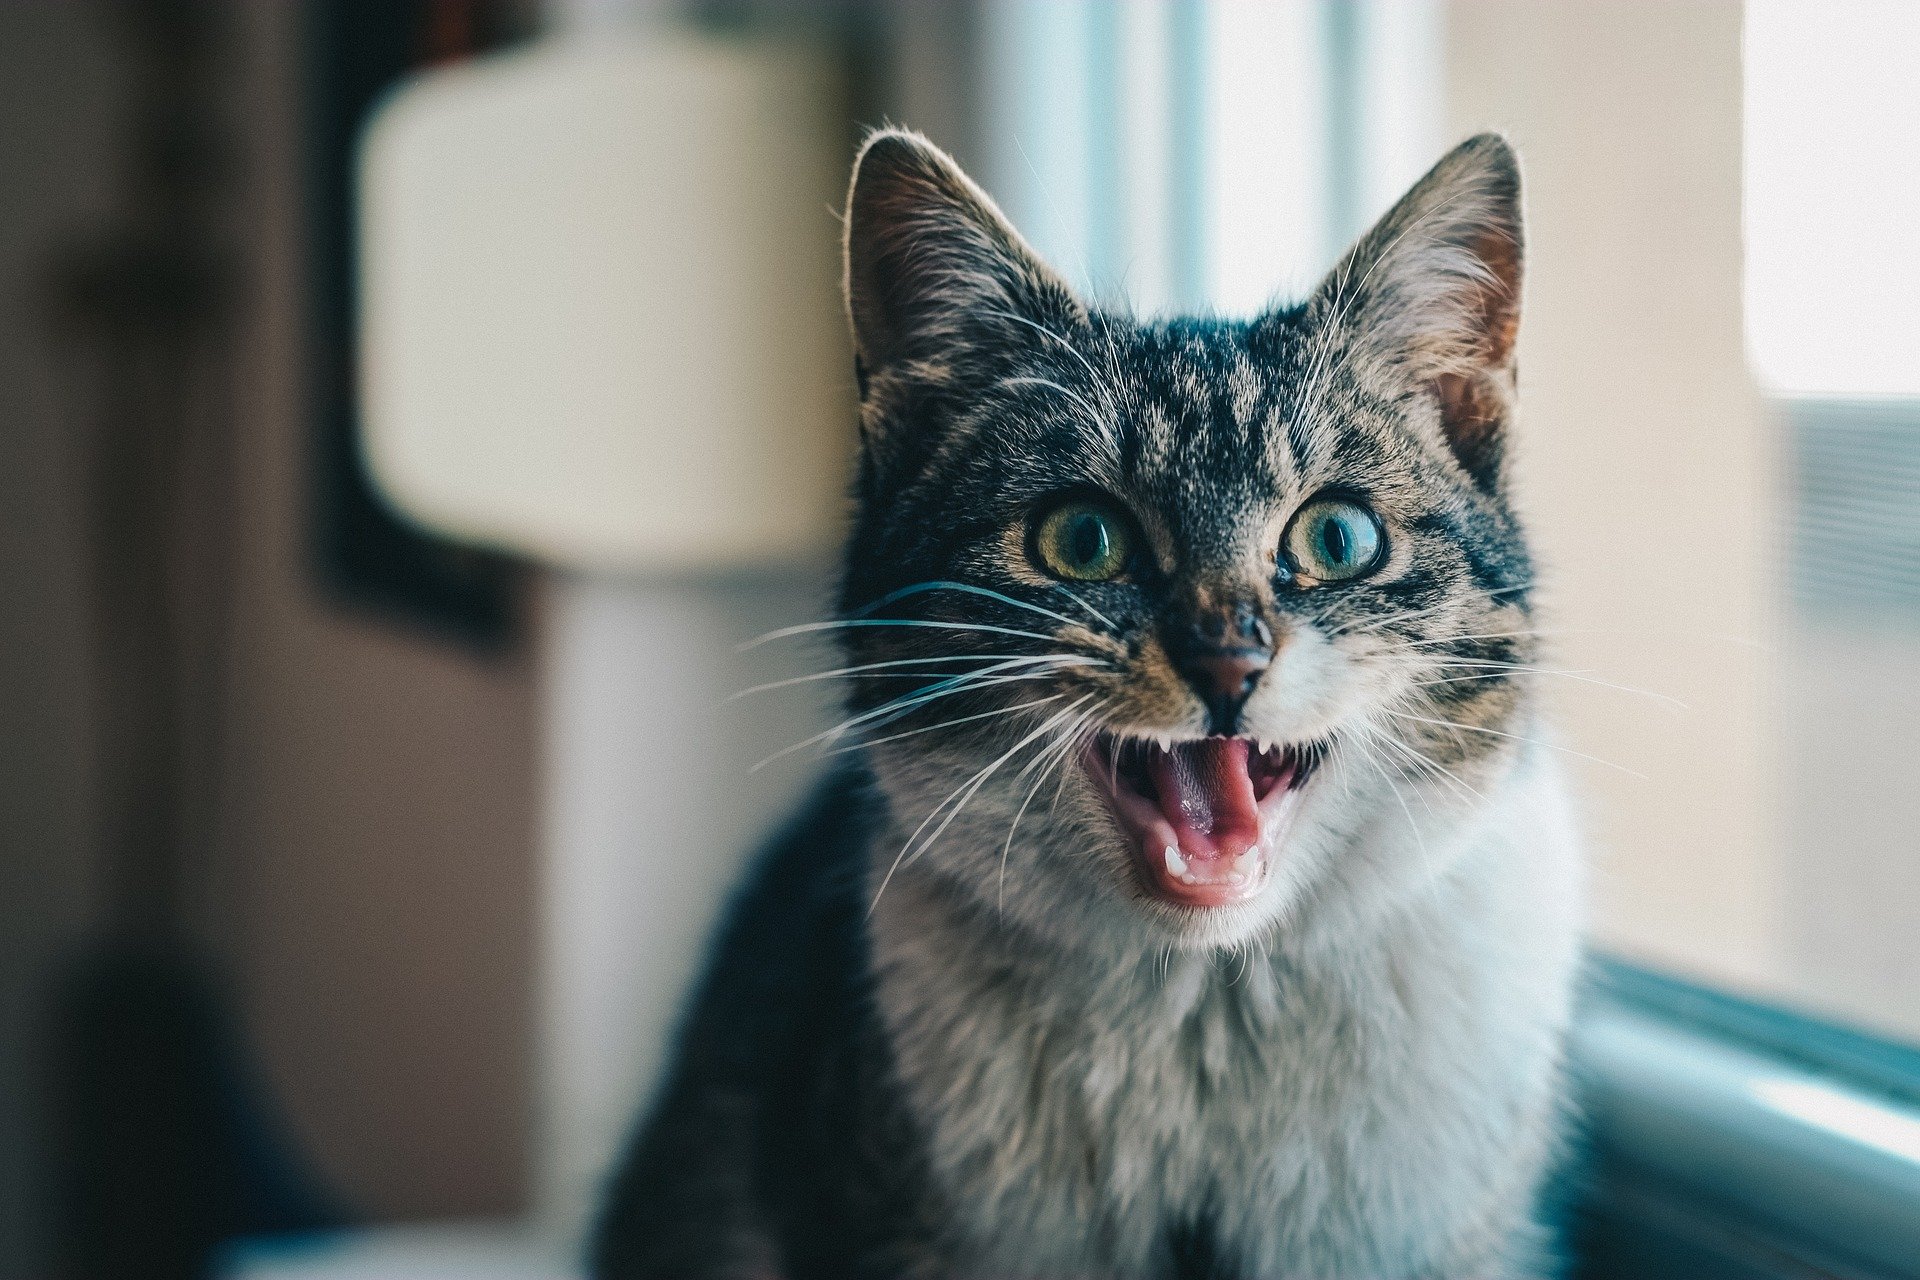 Pet Hemp Company - Why Do Cats Hiss? Cat hissing is one of the many sounds  cats make when they: - are annoyed or angry - feel threatened or scared - or